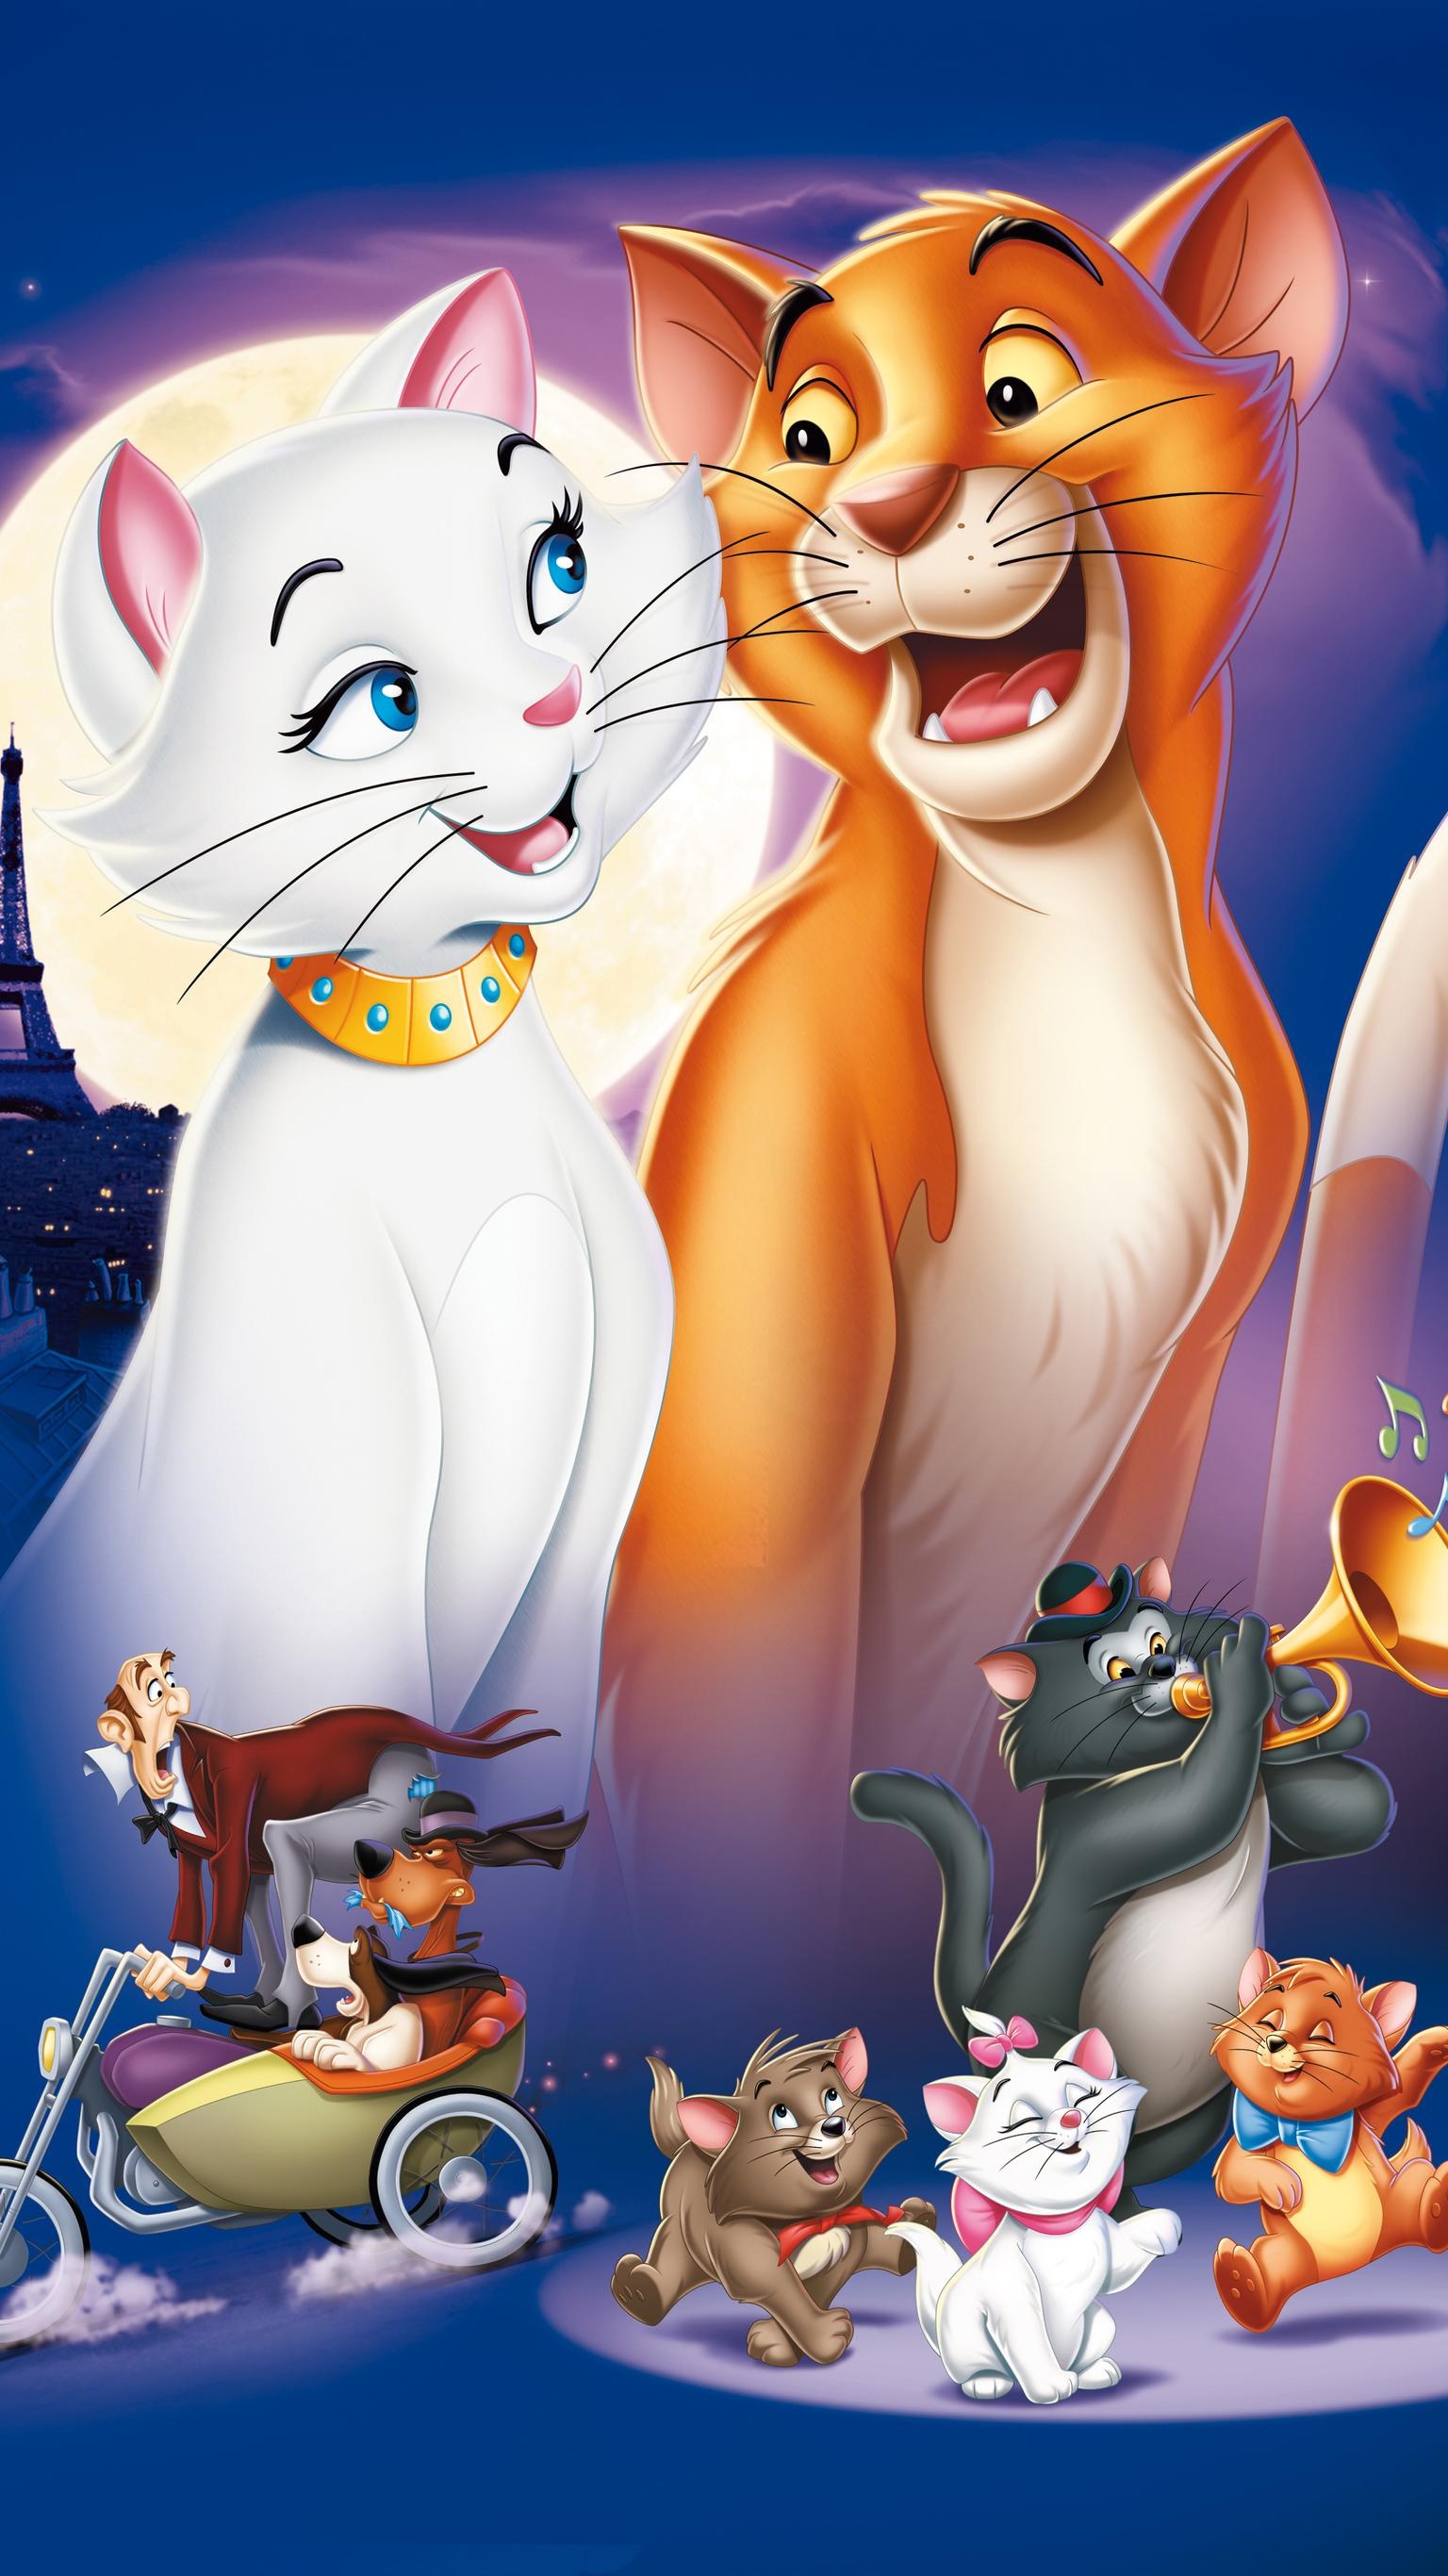 The Aristocats Wallpapers - Top Free The Aristocats Backgrounds 1540x2740